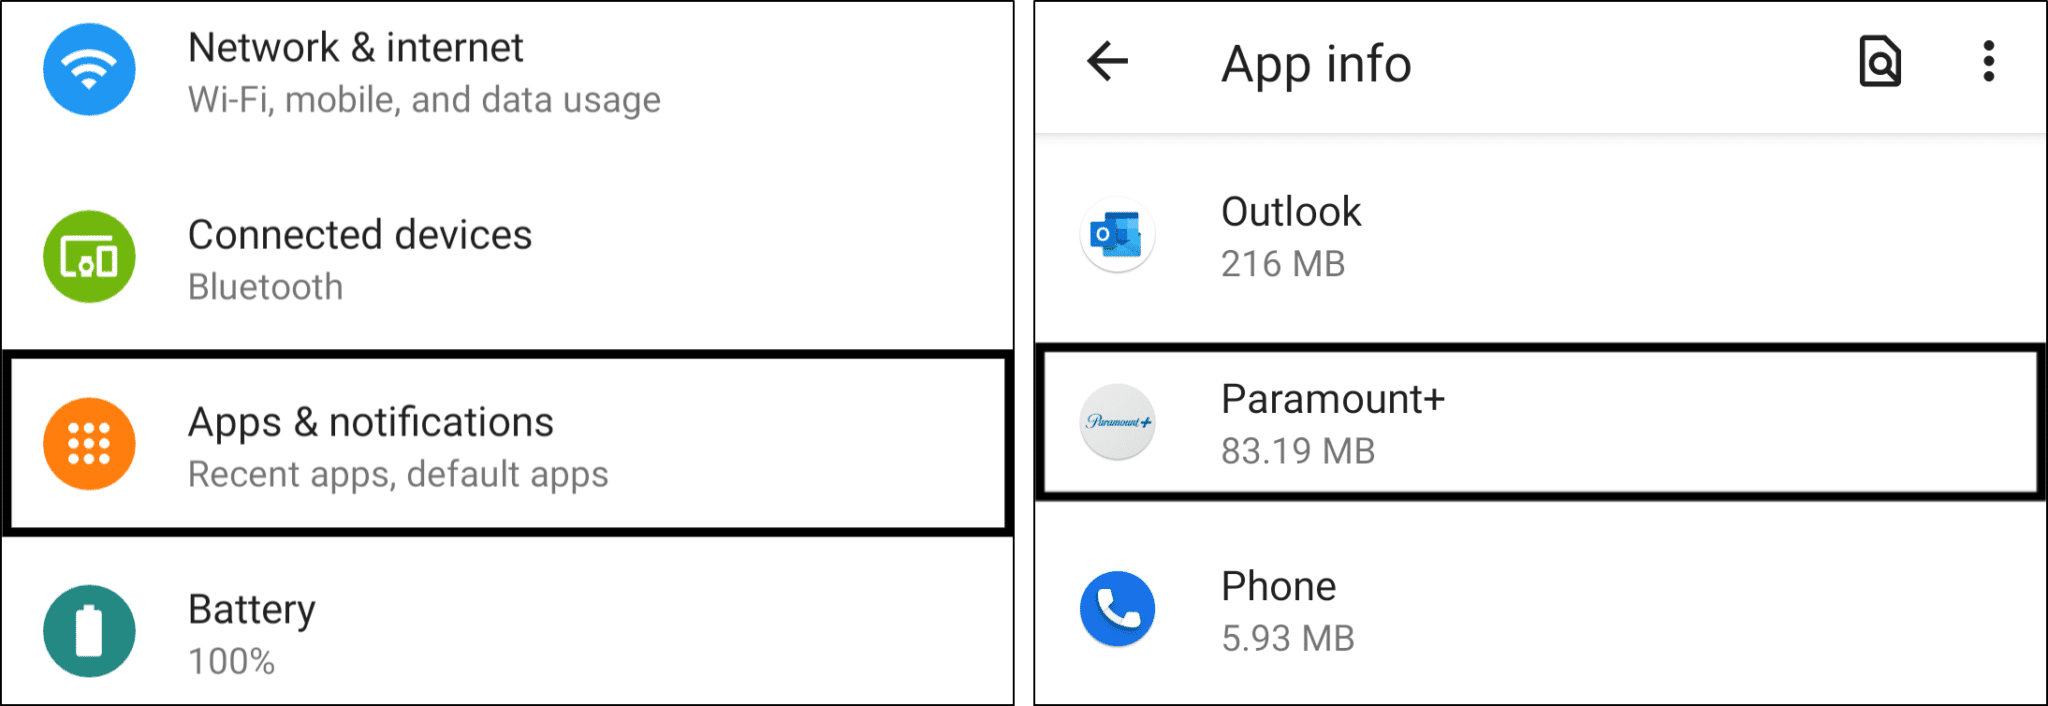 access Paramount Plus app settings in system settings on Android to clear app cache and data to fix Paramount Plus keeps buffering, not working, playing or loading